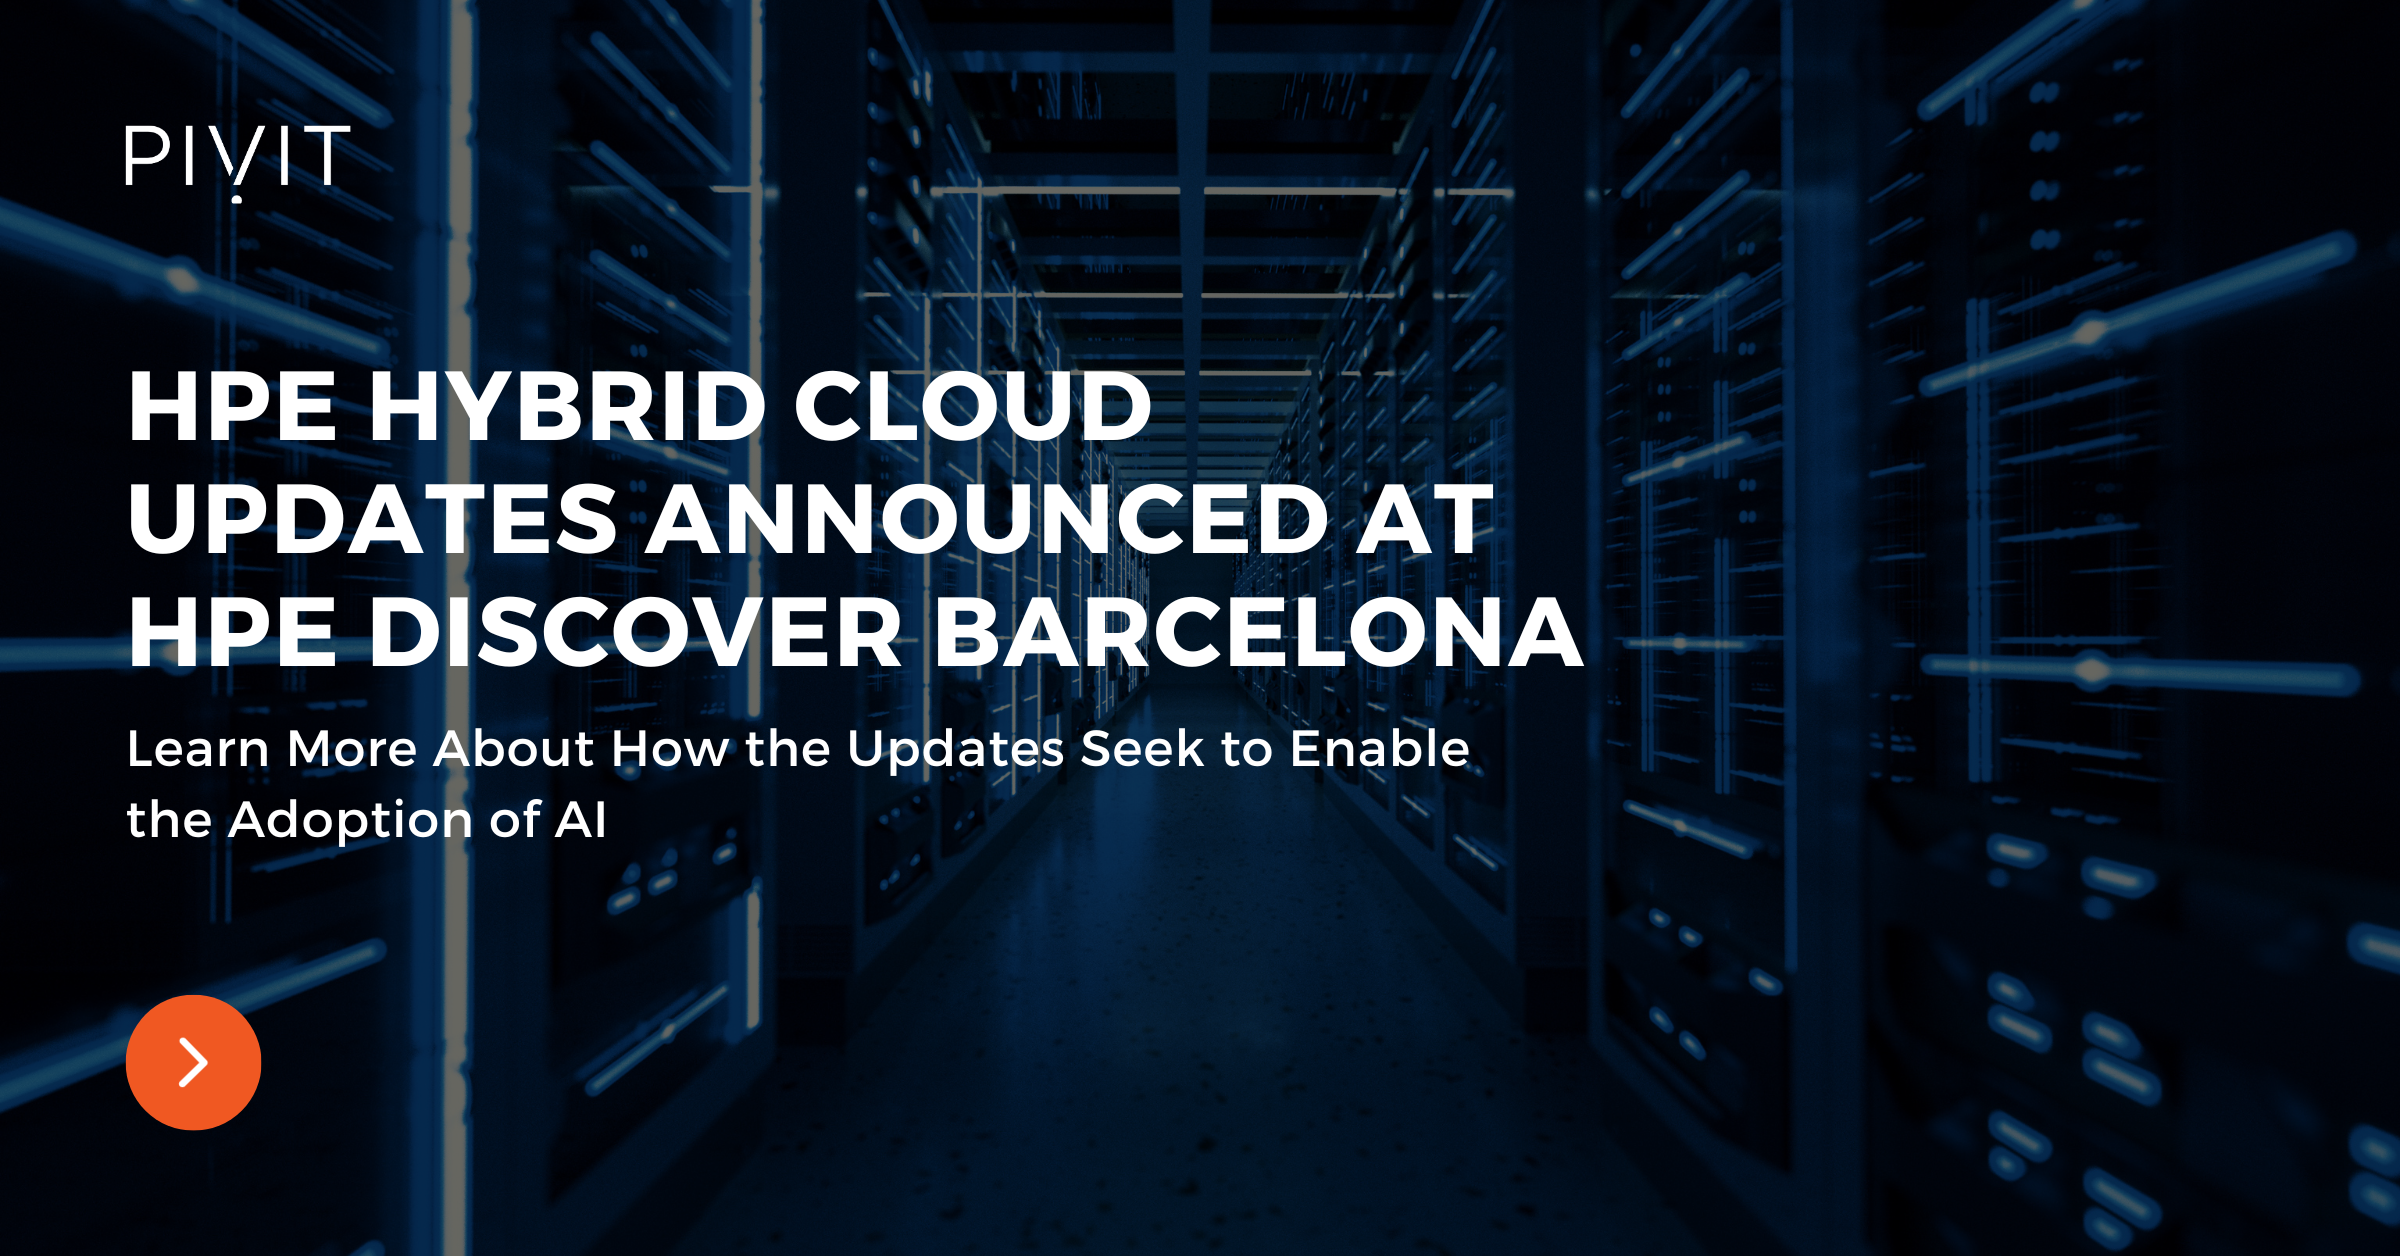 HPE Hybrid Cloud Updates Announced at HPE Discover Barcelona - Learn More About How the Updates Seek to Enable the Adoption of AI